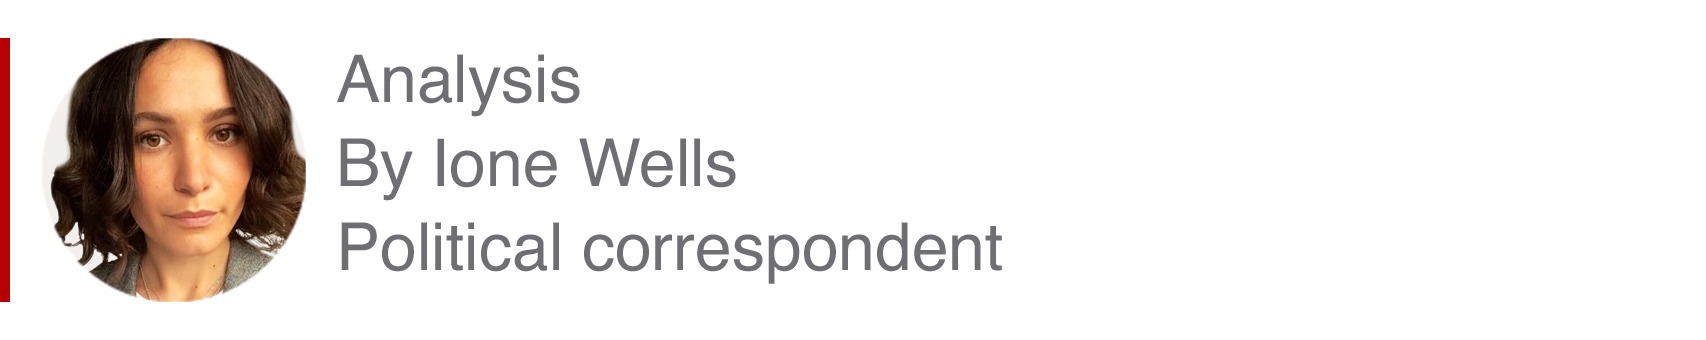 Analysis box by Ione Wells, political correspondent